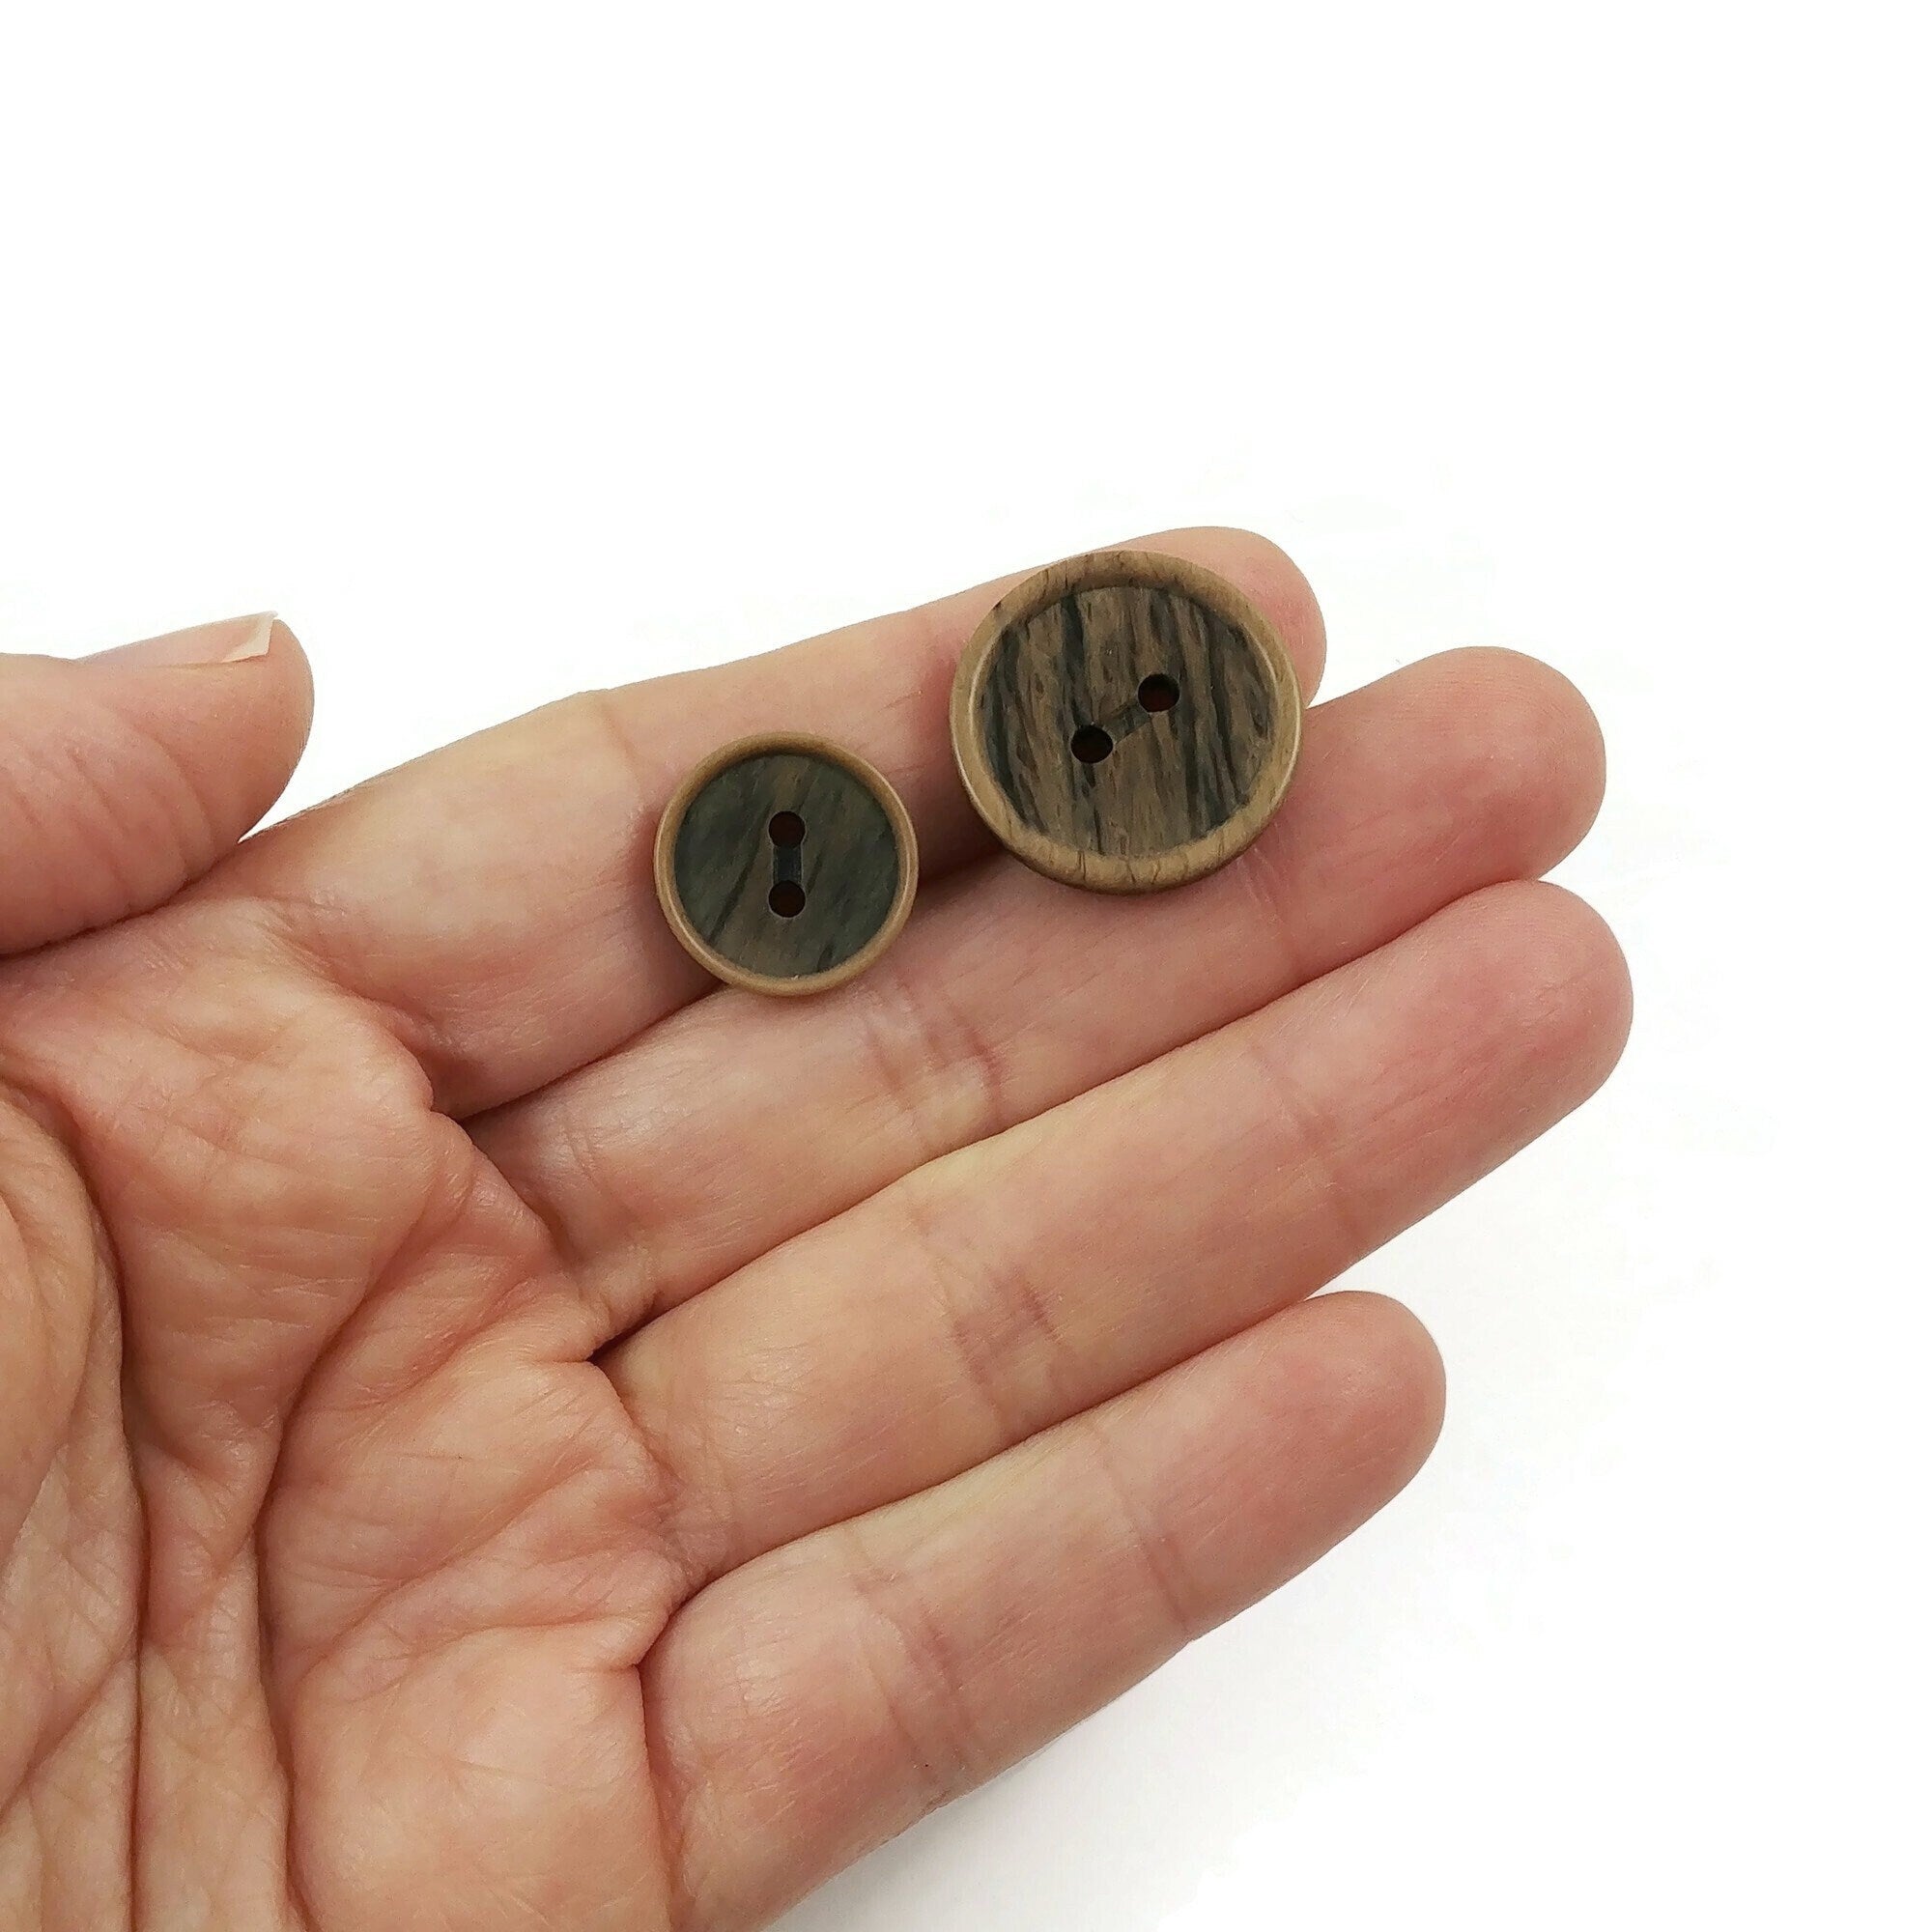 4 brown resin sewing buttons - Pick your size: 15mm or 20mm